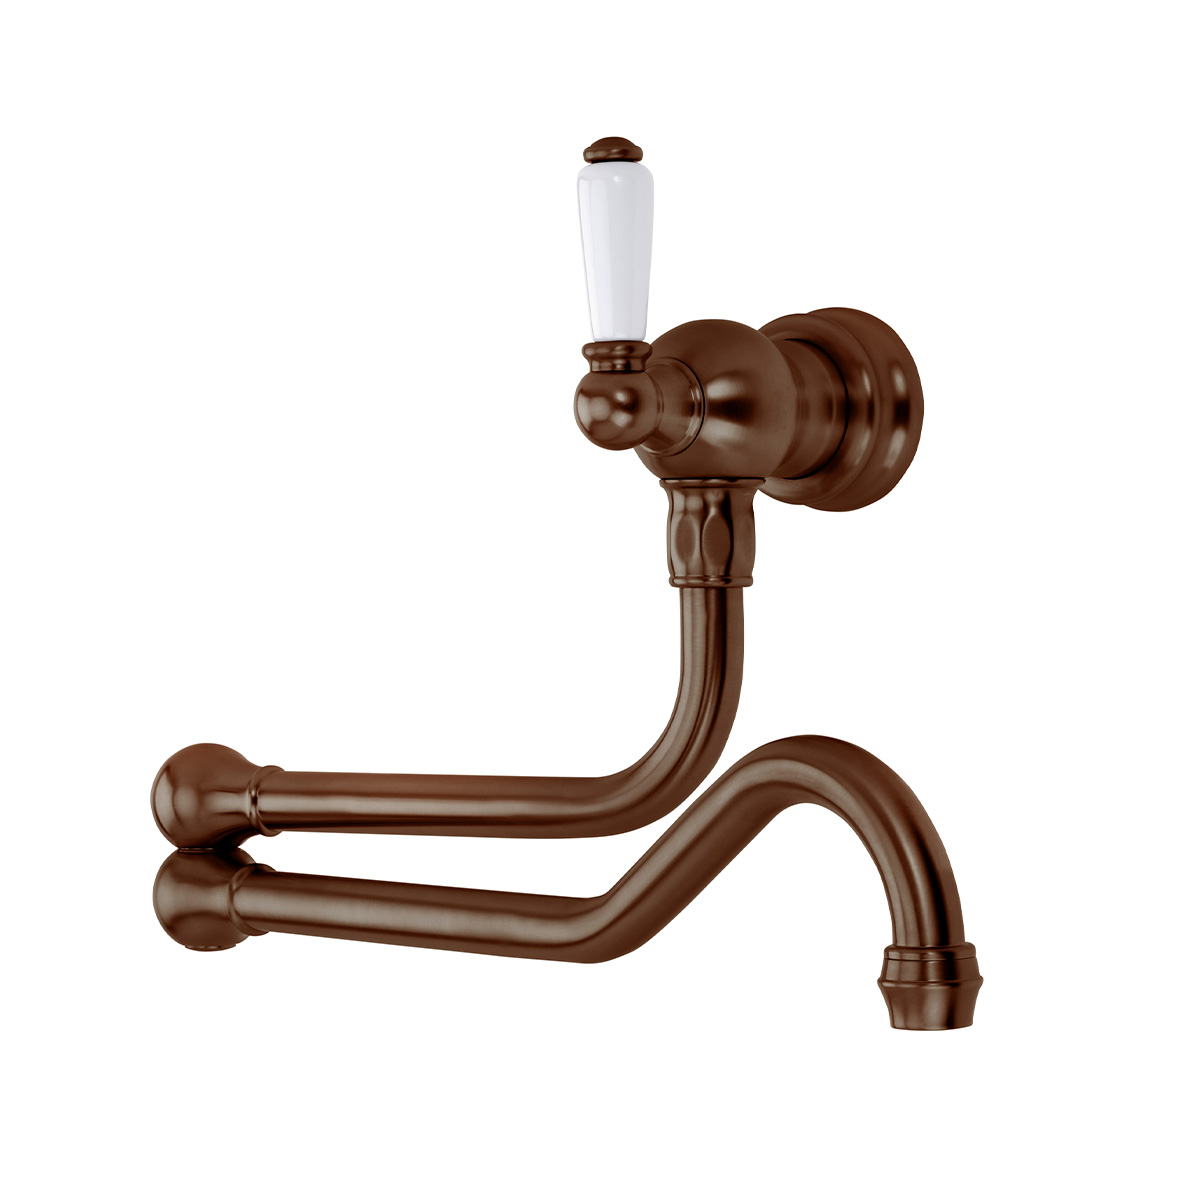 Shaws by Perrin & Rowe wall mounted pot filler in English Bronze. Traditional style pot filler with single white porcelain handle - AUSH.4417. Distributed in Australia by Luxe by Design, Brisbane.